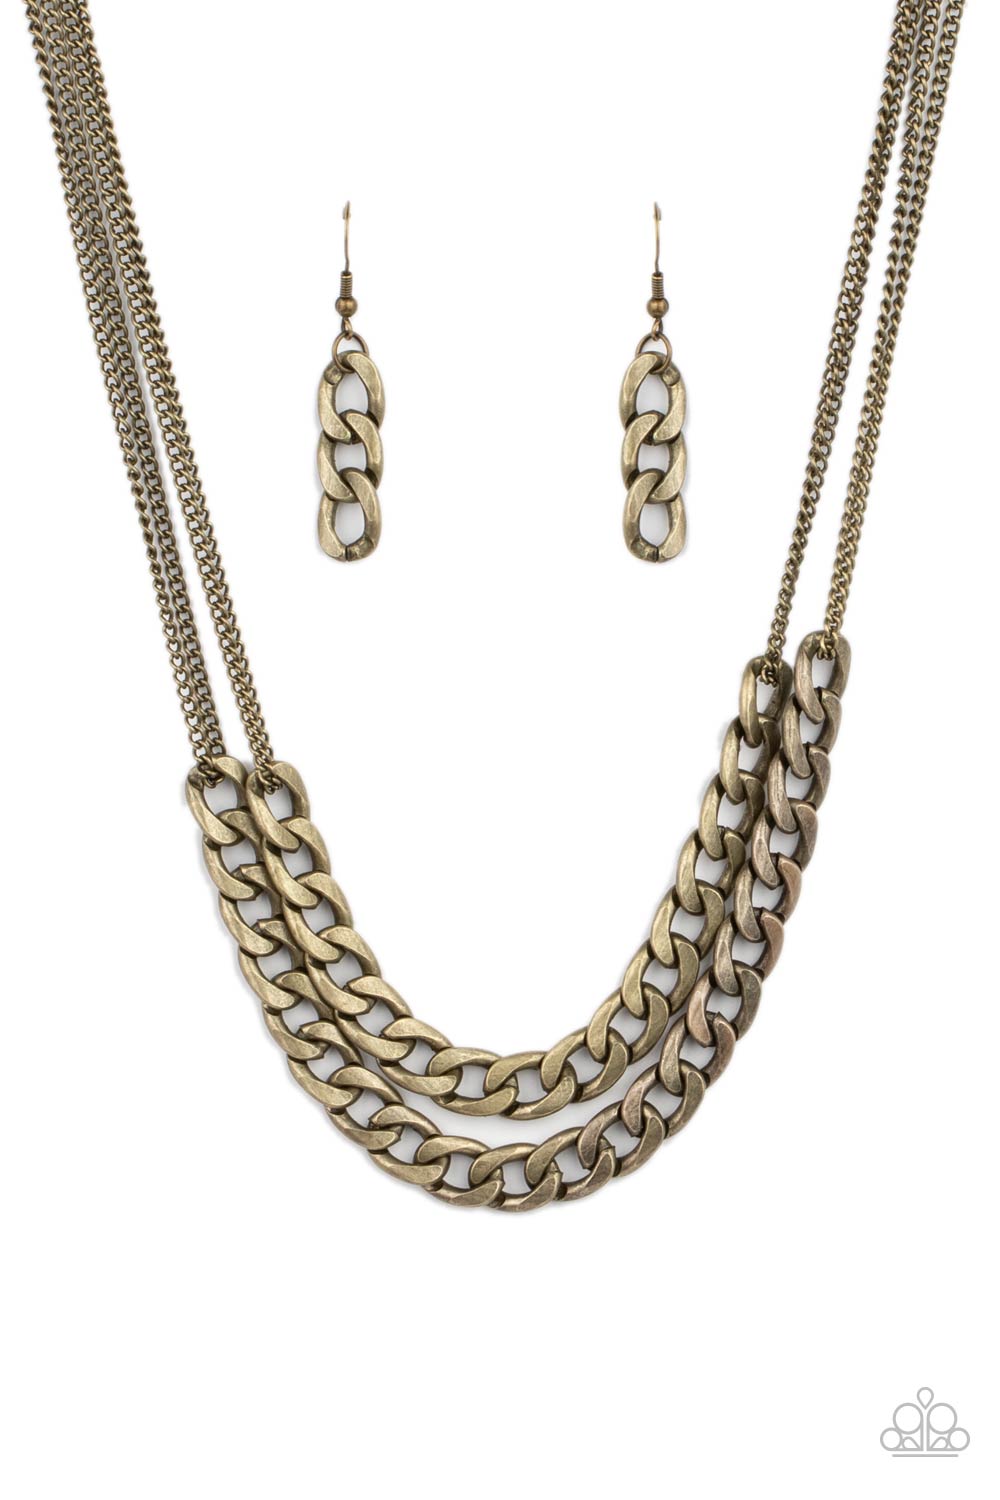 Urban Culture - Brass Necklace two sections of chunky brass curb chain attach to doubled brass chains below the collar, creating an intense industrial centerpiece. Features an adjustable clasp closure.  Sold as one individual necklace. Includes one pair of matching earrings.  Paparazzi Jewelry is lead and nickel free so it's perfect for sensitive skin too!!